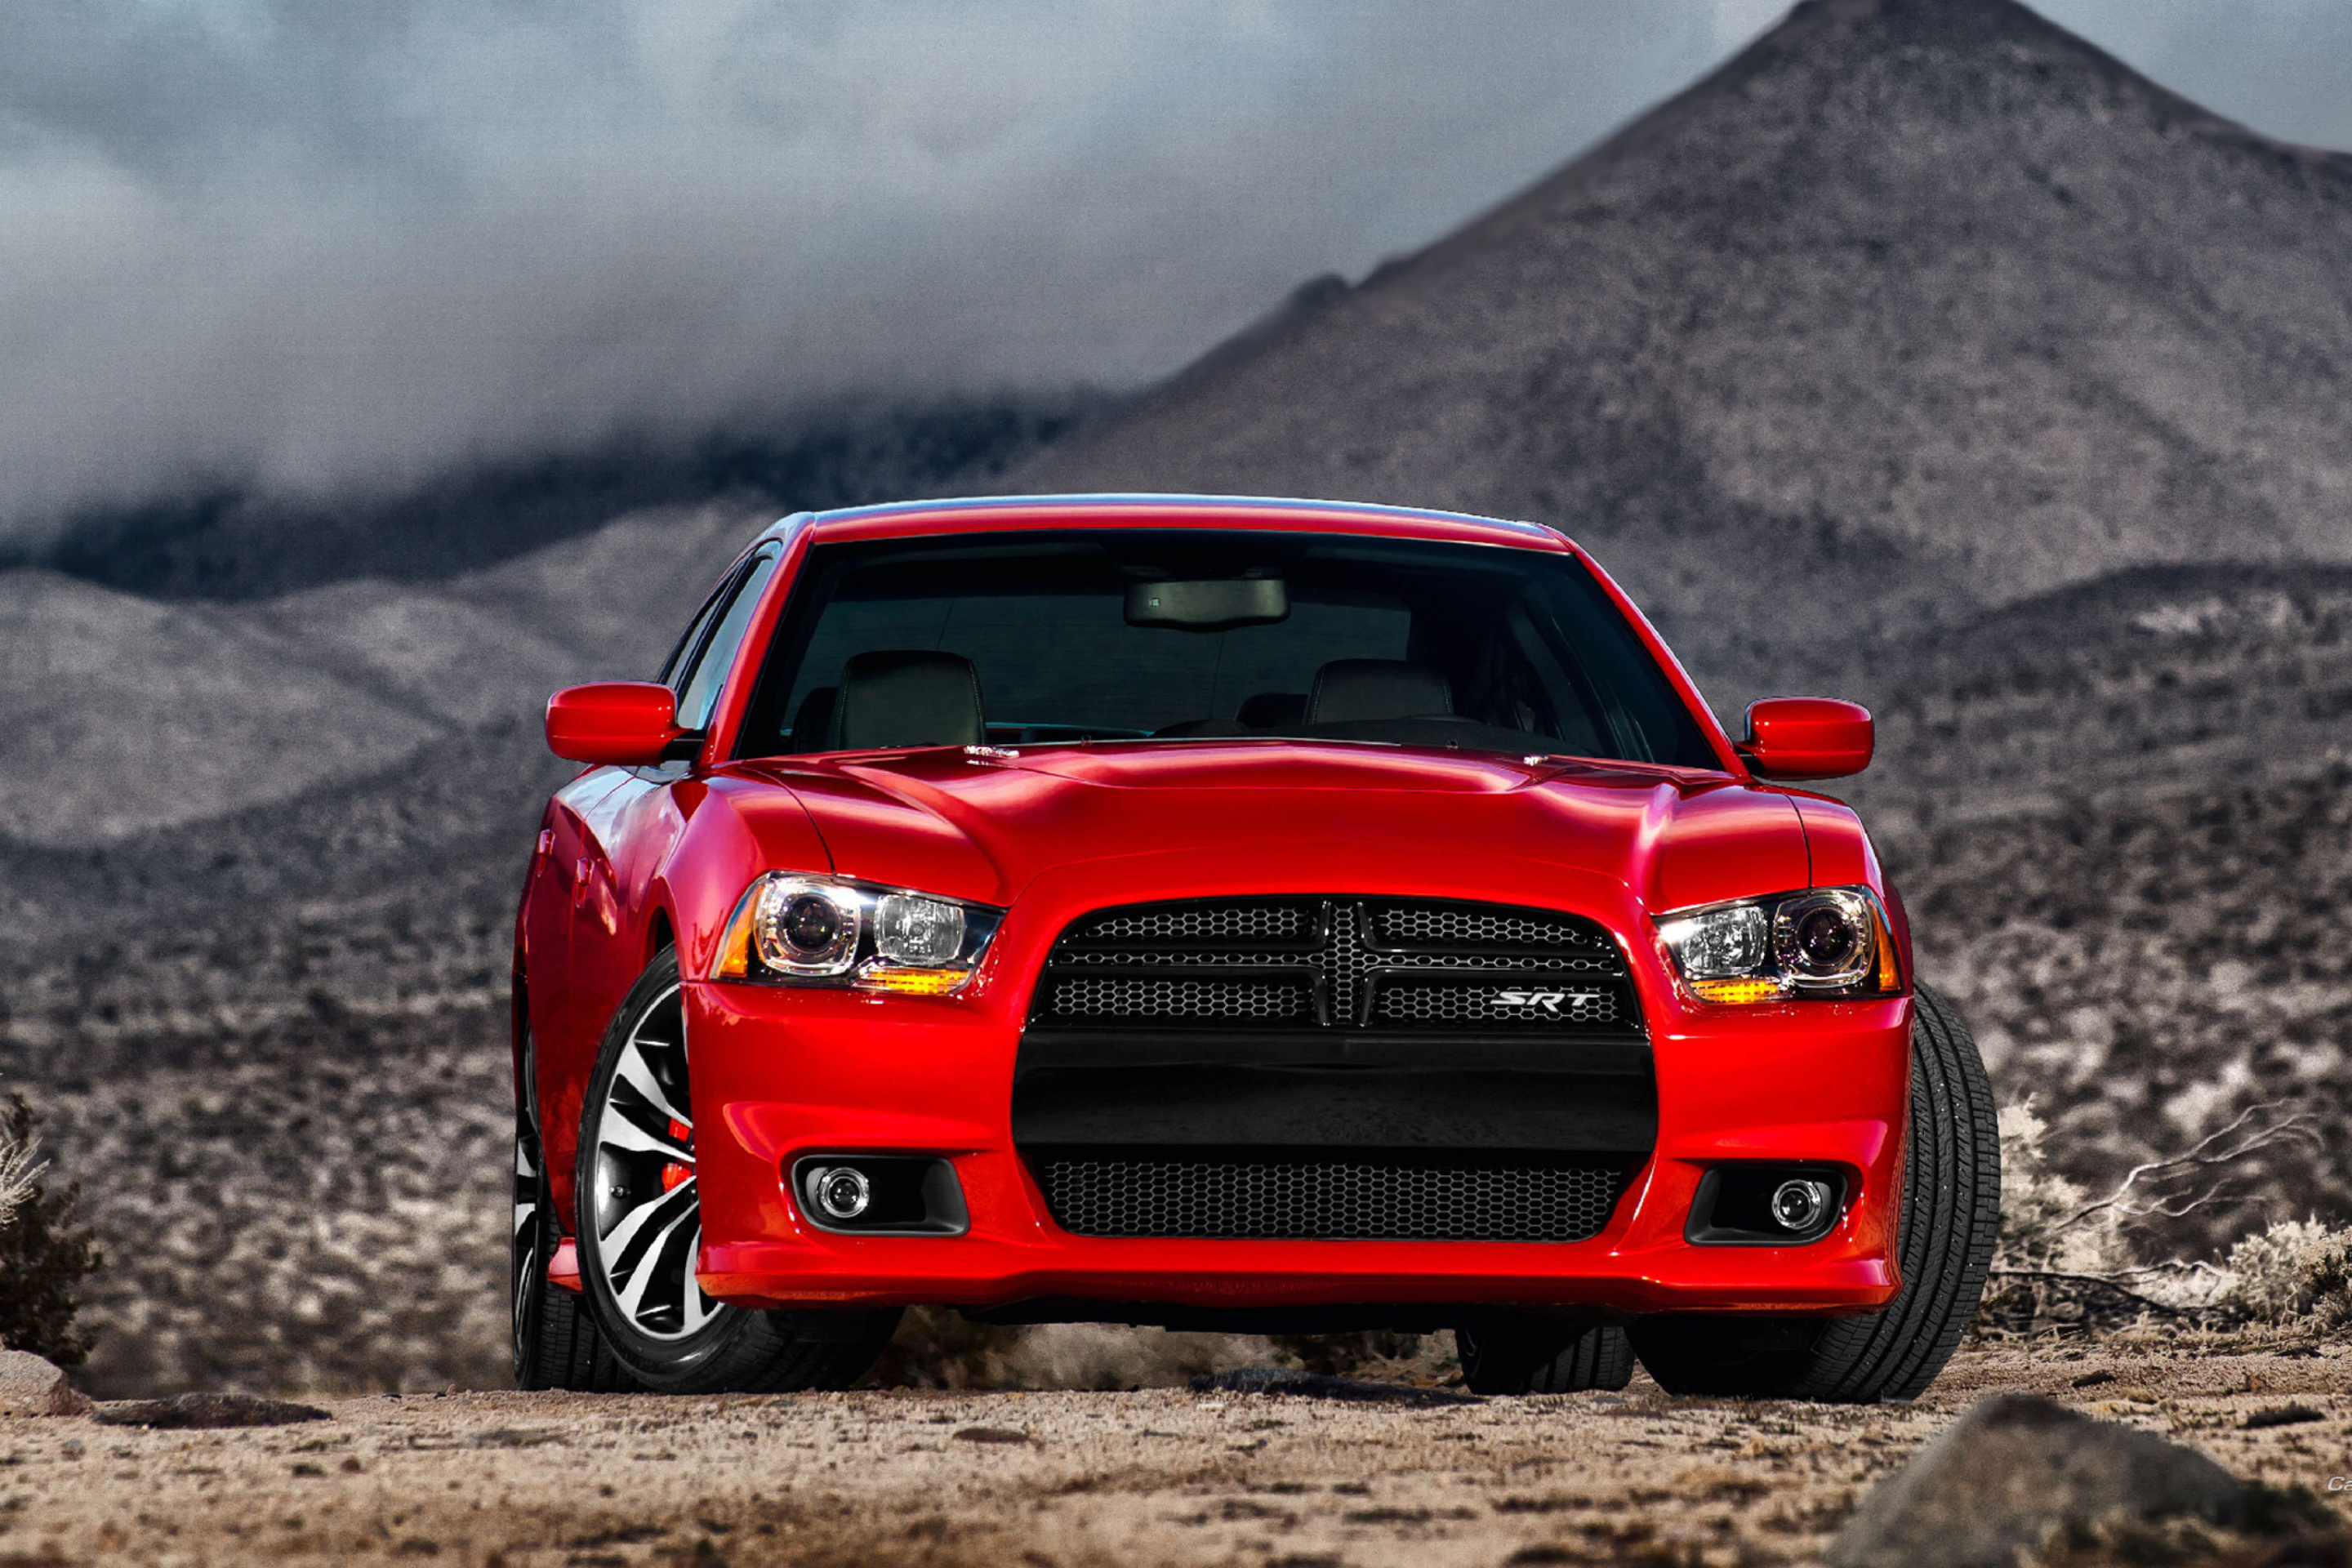 2015 Dodge Charger wallpaper 2880x1920